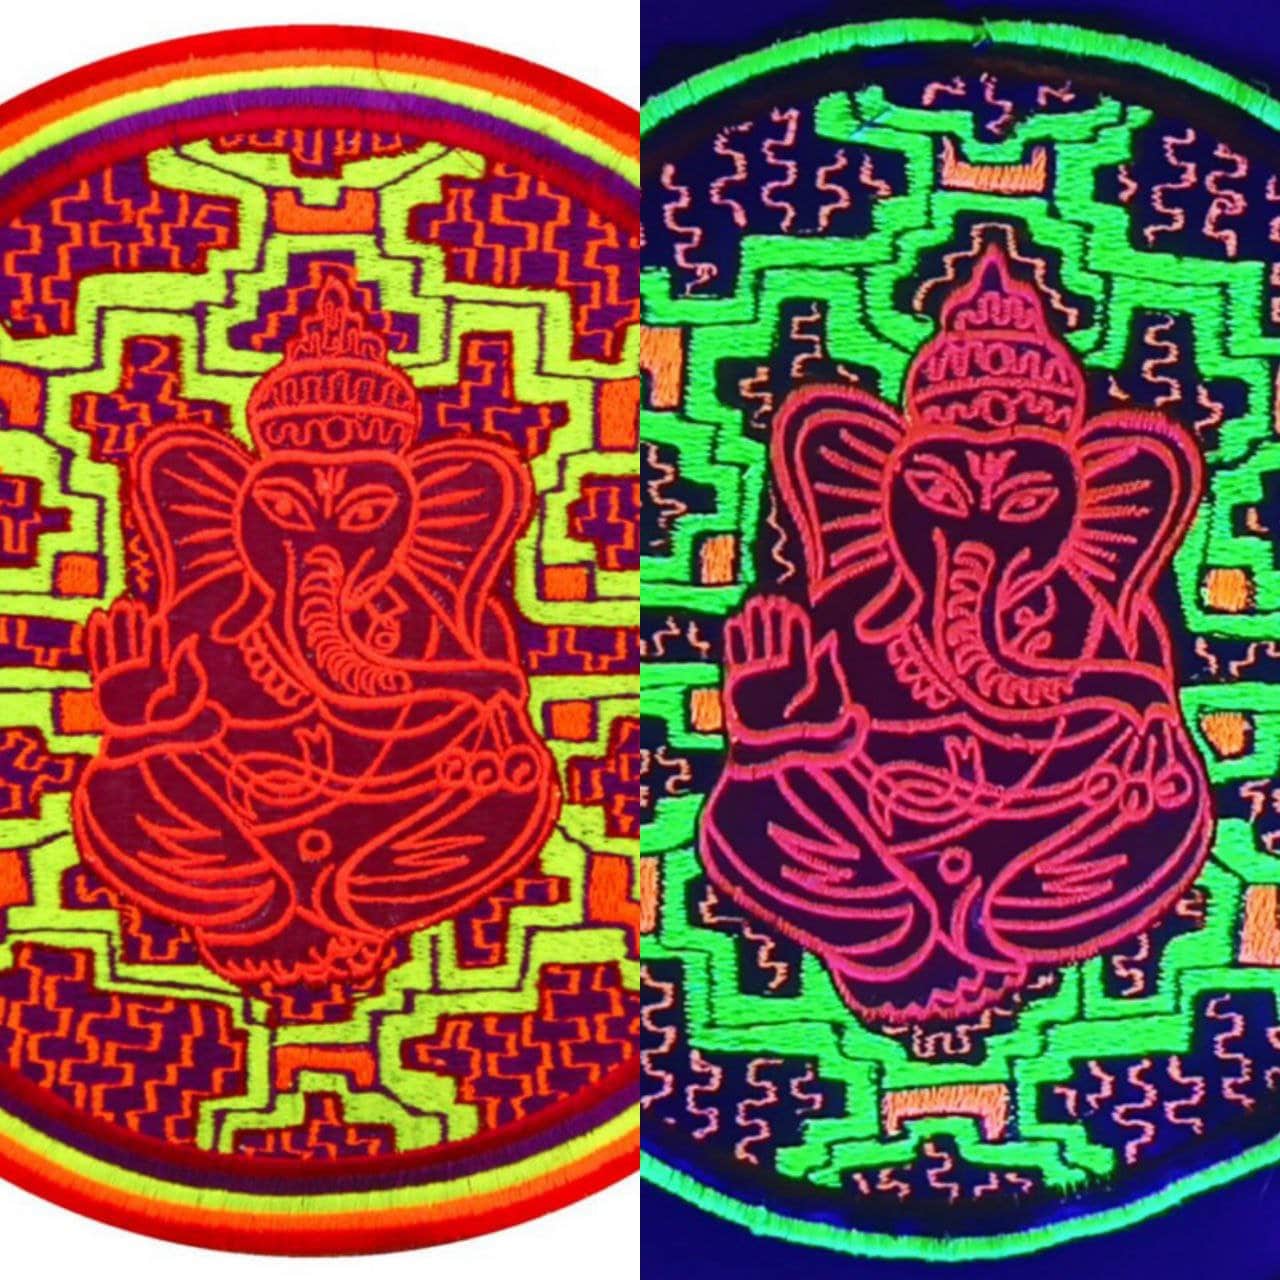 Ganesha Ayahuasca Patch Visionary DMT Songs Artwork Icaro Sacred Shipibo Healing Patterns Woven Songs of the Amazon UV glowing embroidery